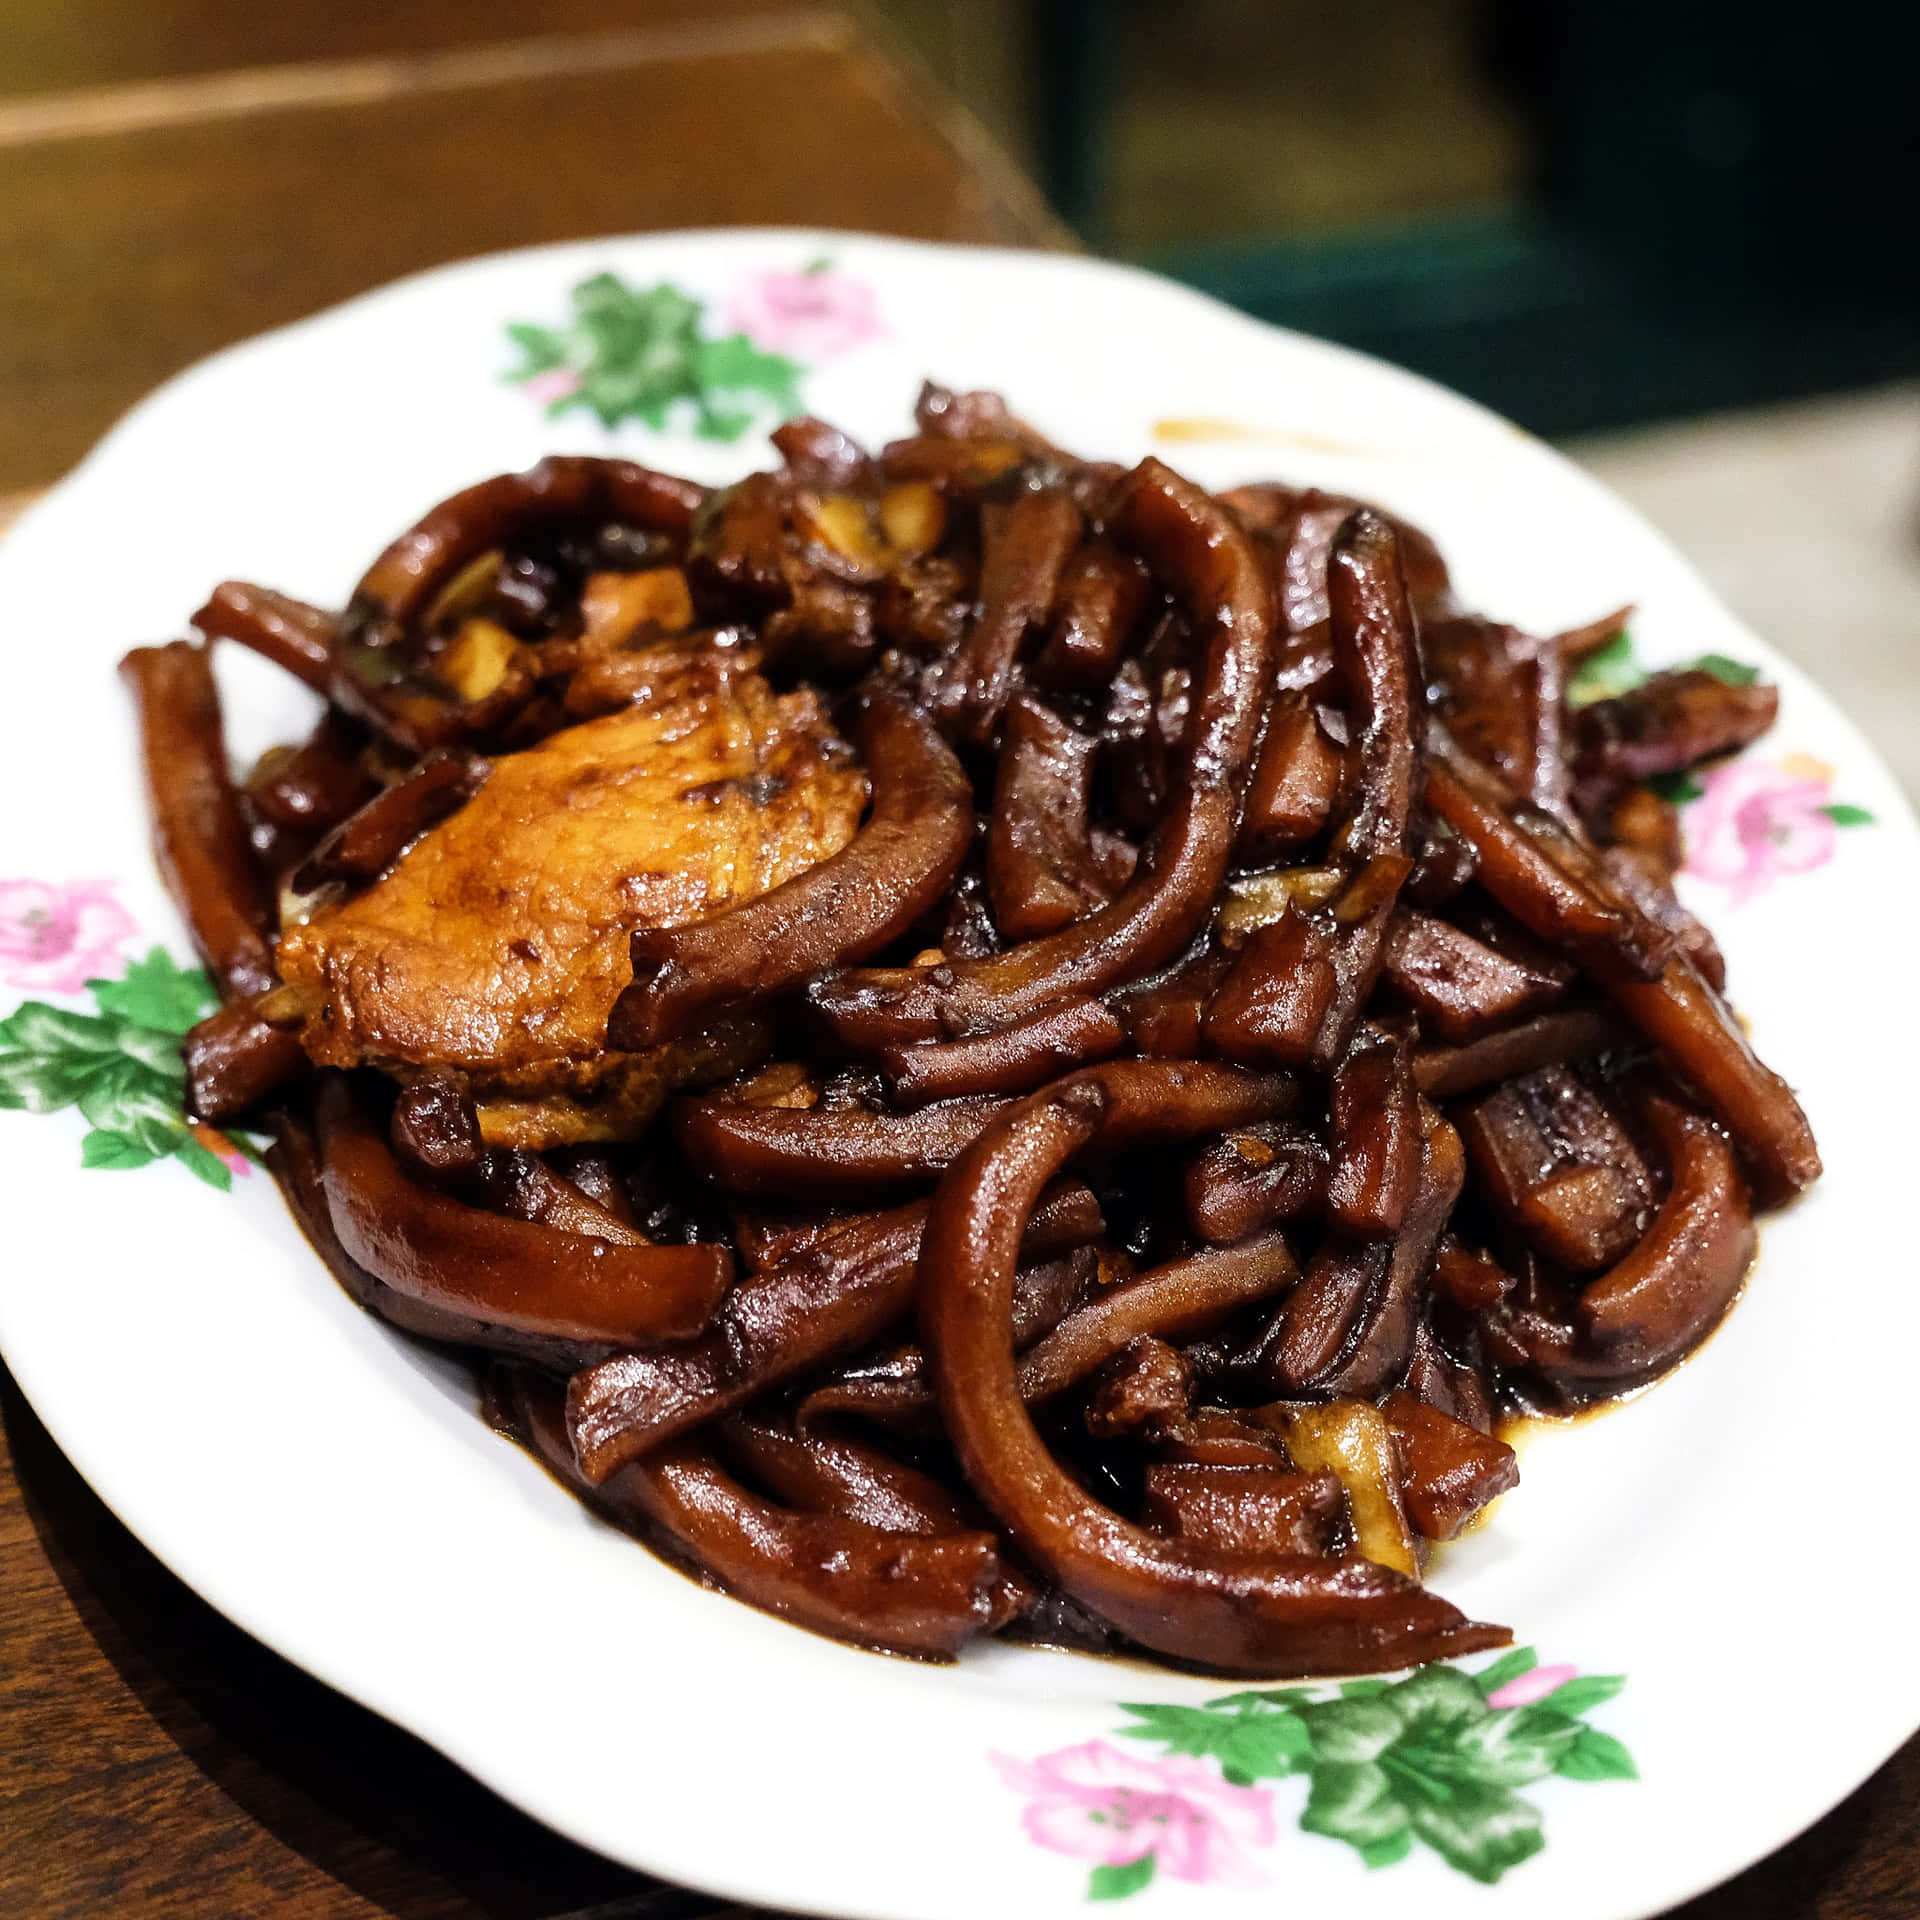 Hokkien Mee On Plate With Floral Design Picture